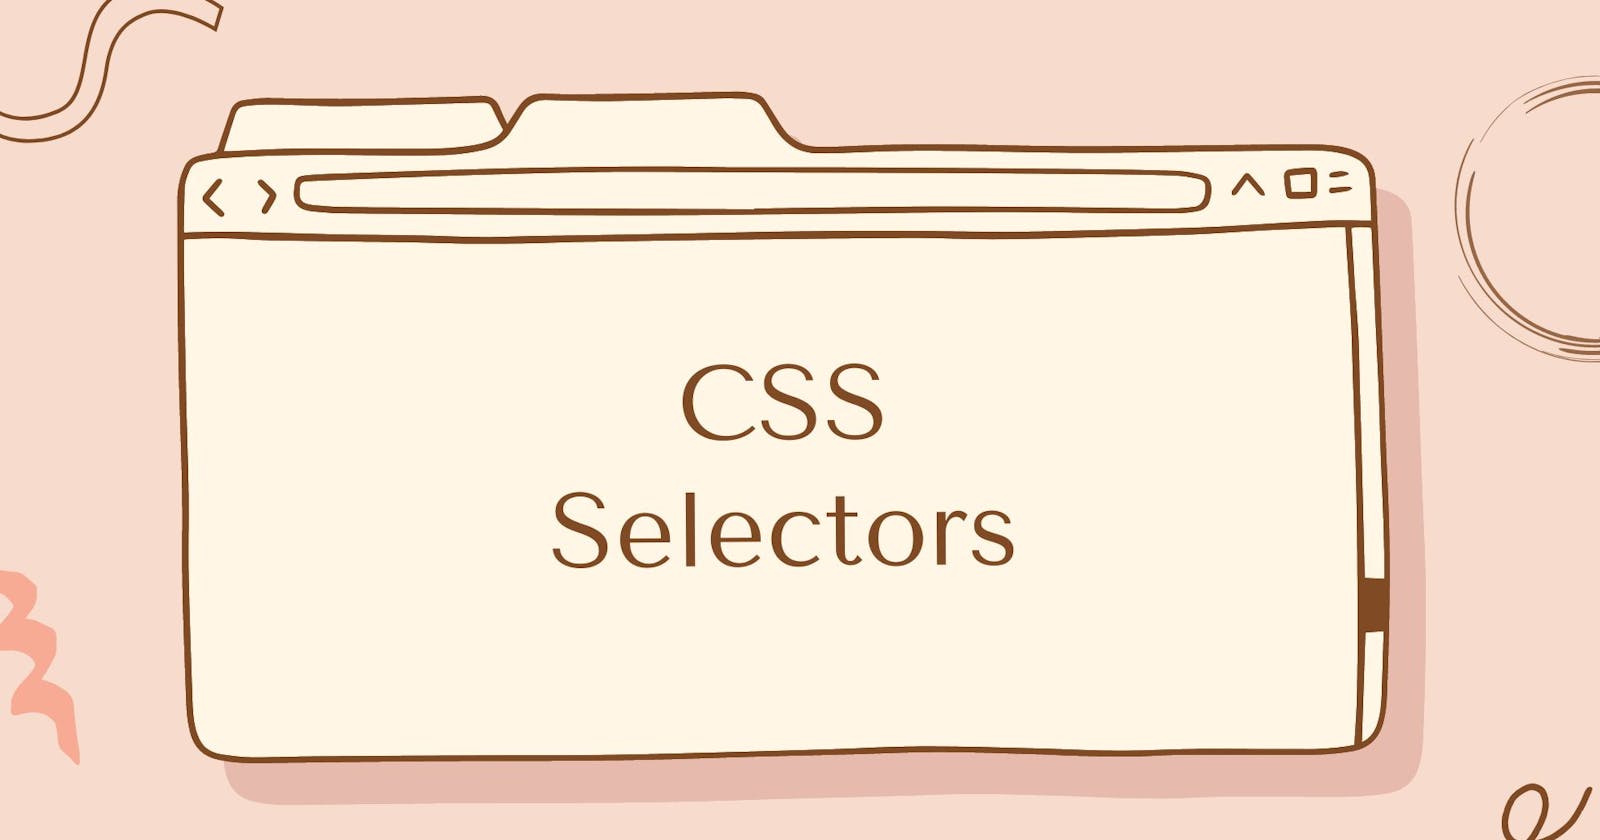 One-stop guide to CSS selectors